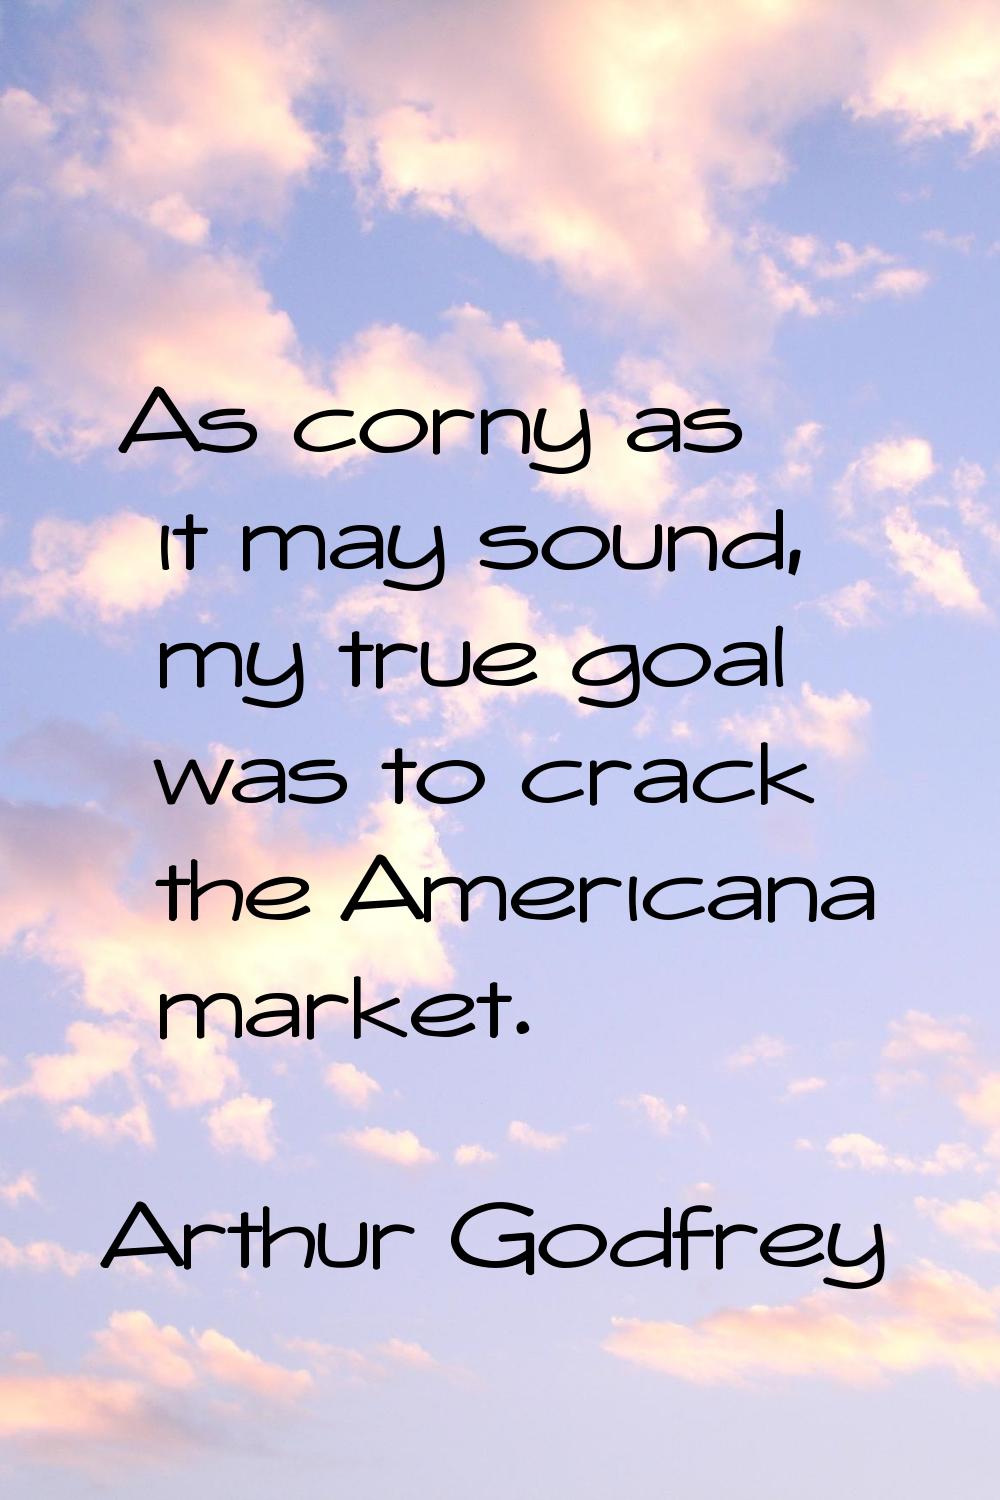 As corny as it may sound, my true goal was to crack the Americana market.